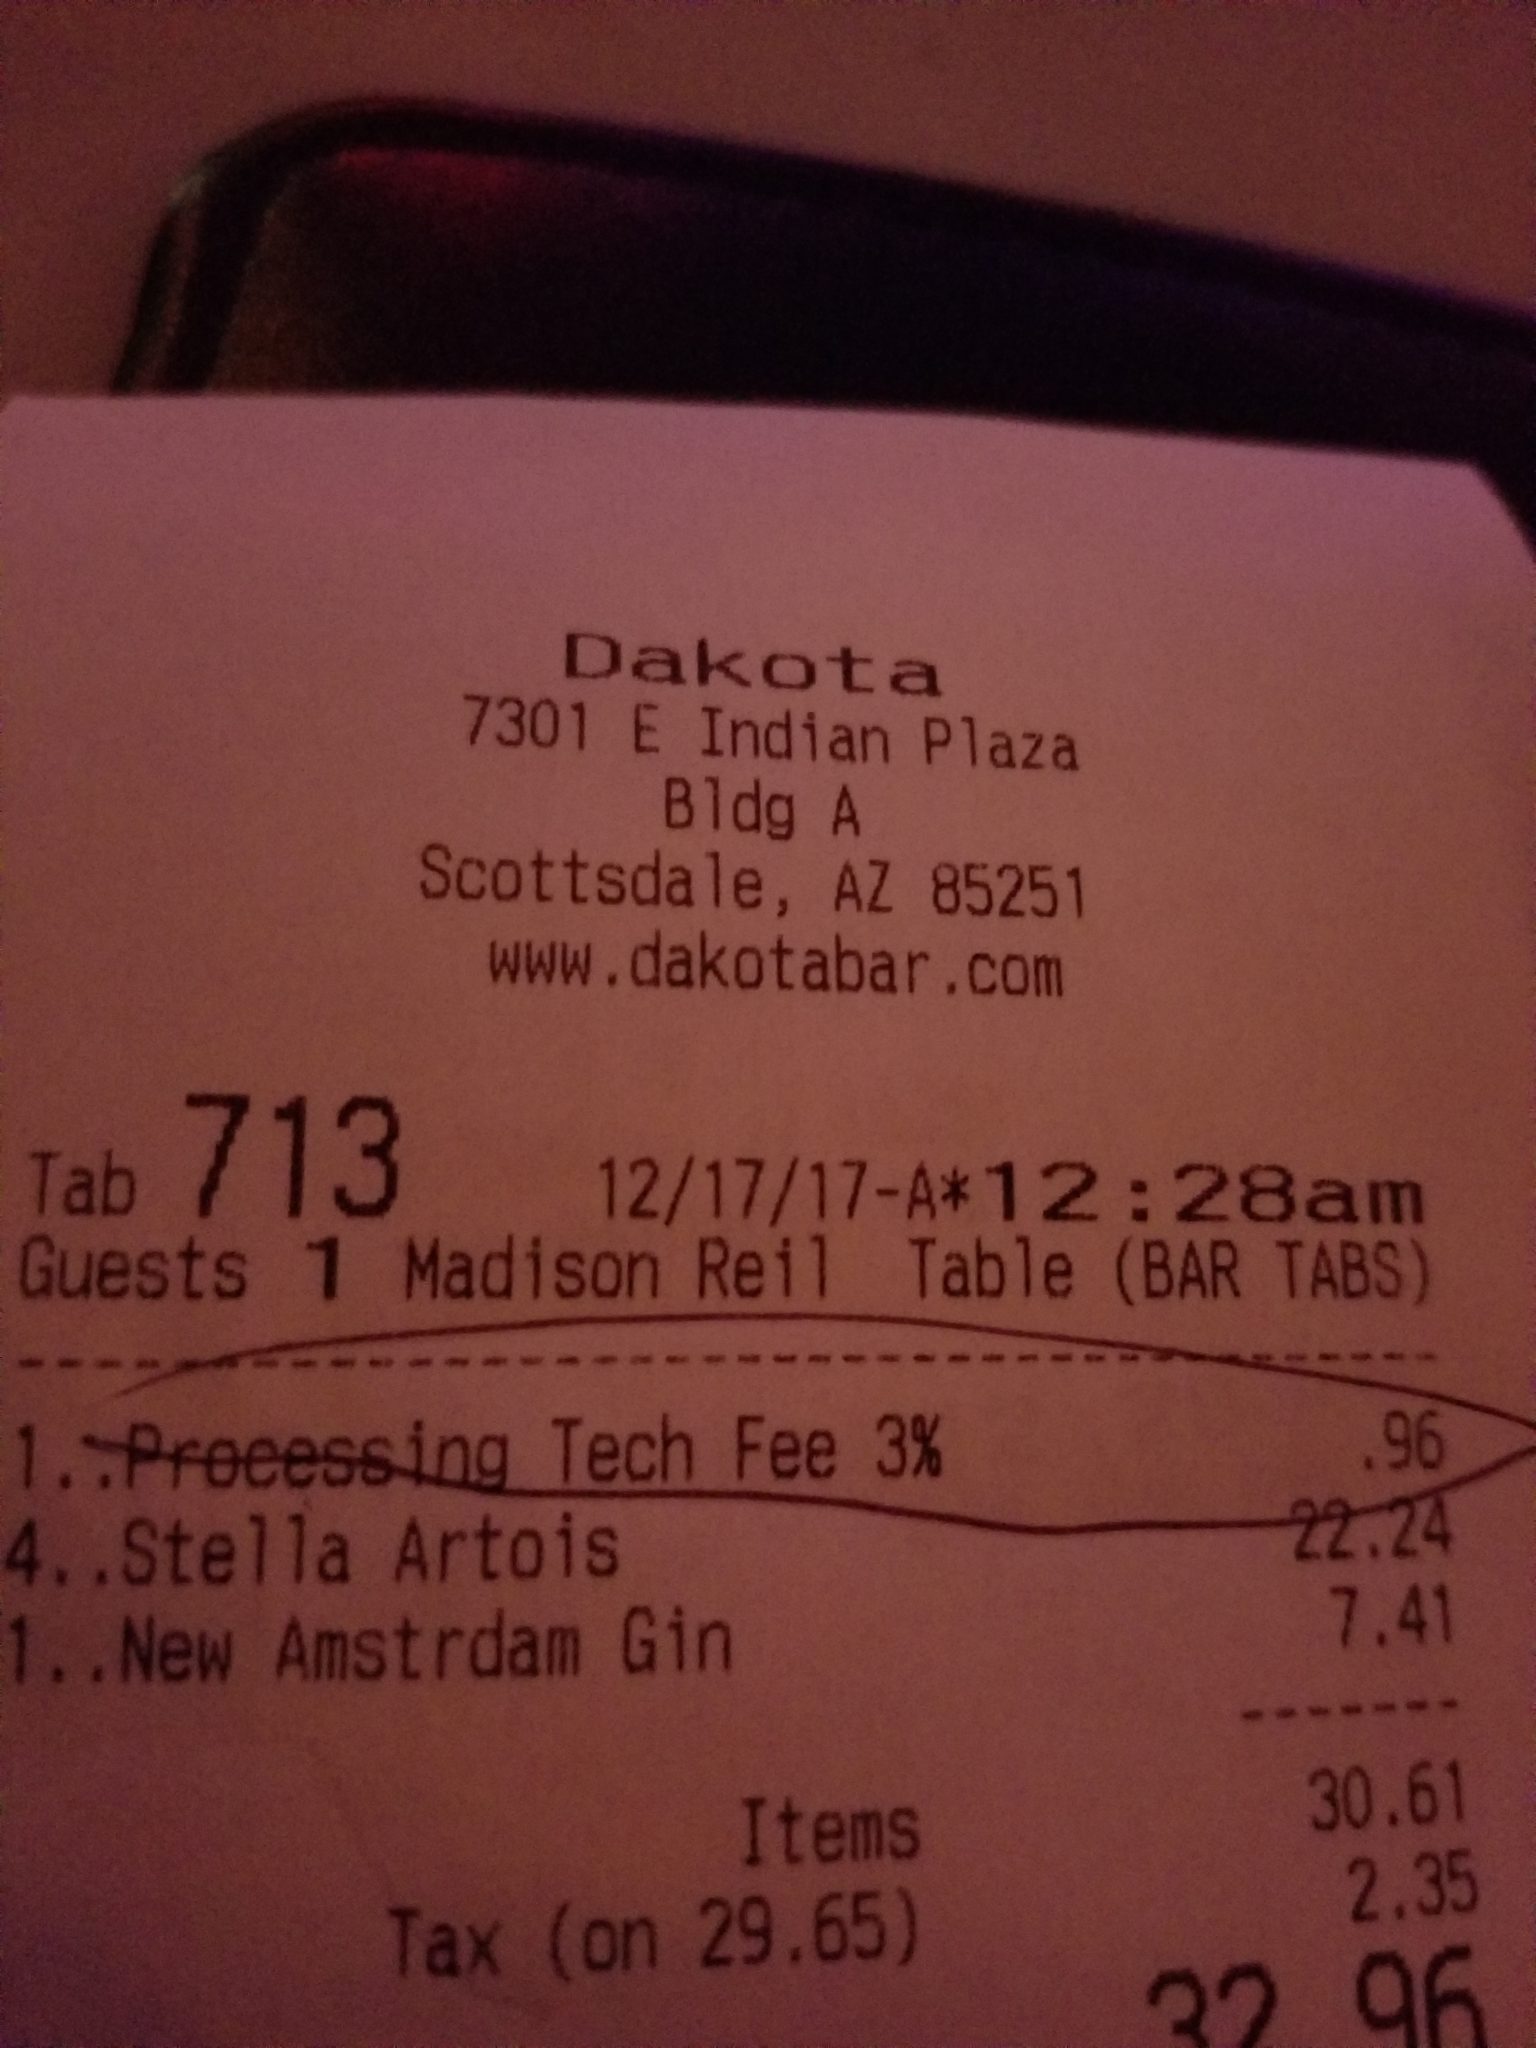 a receipt with a date and numbers